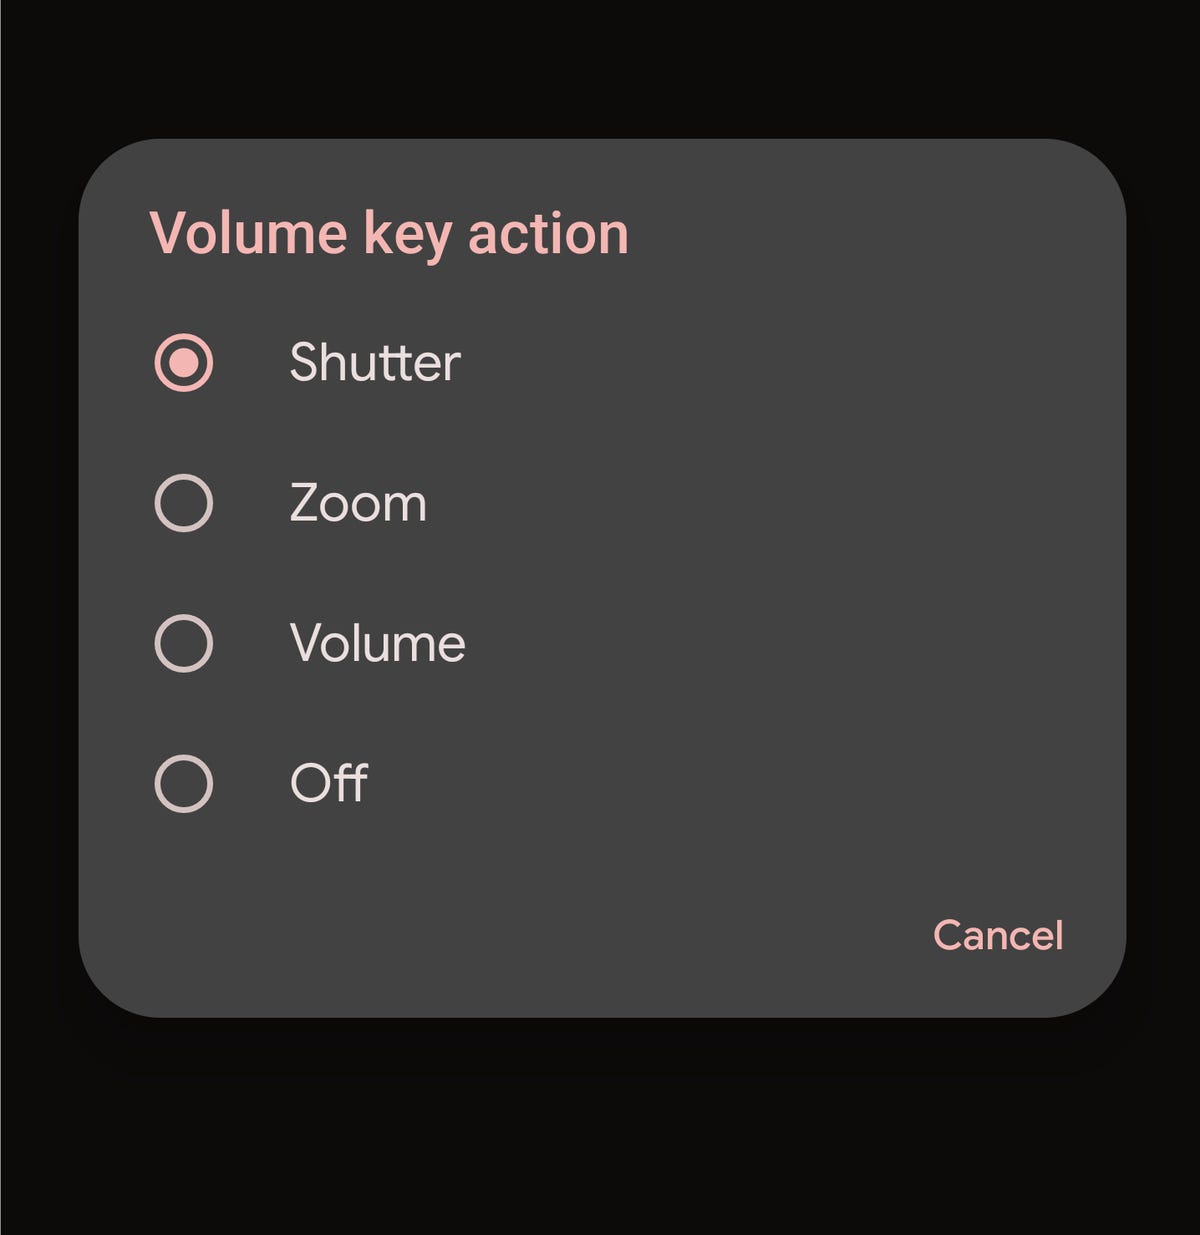 A screenshot showing the volume key action options on the Pixel